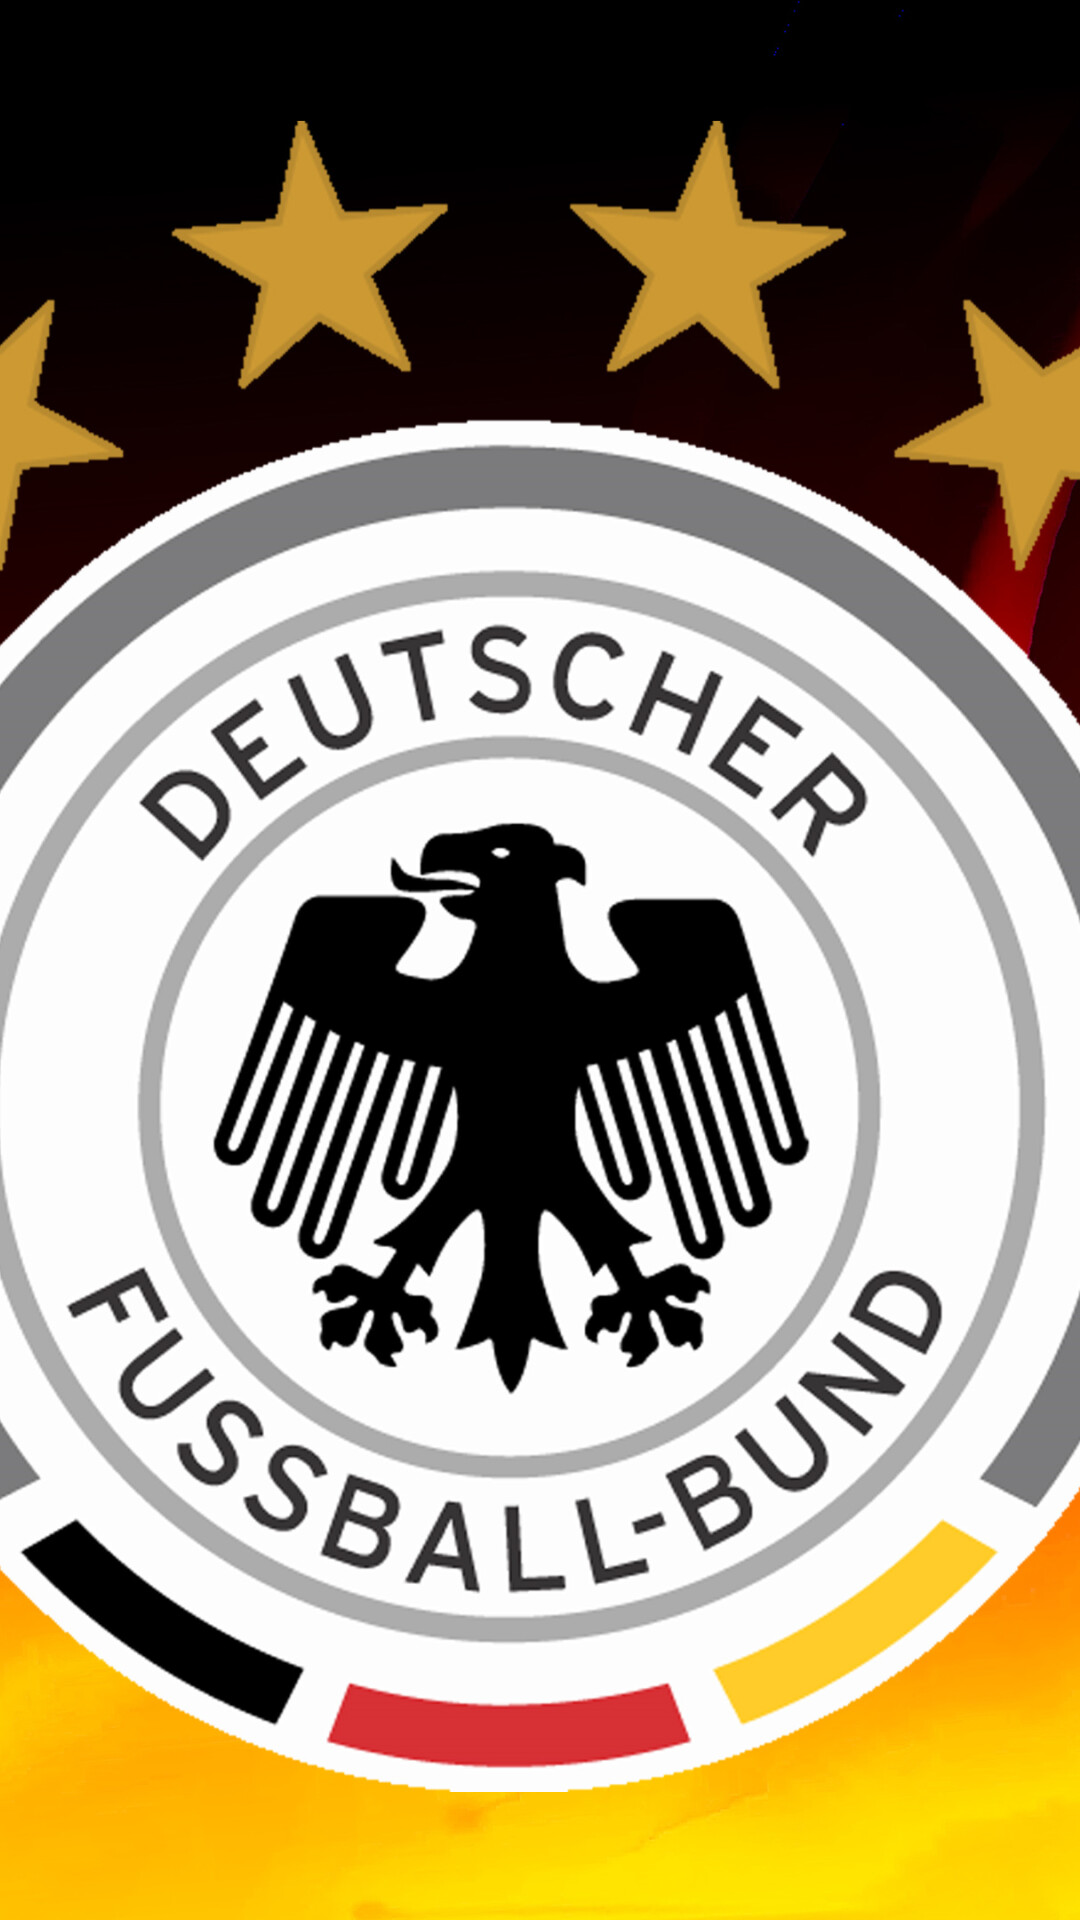 Germany Soccer Team: Owners of the second highest Elo rating of any national football team in history, World Champions. 1080x1920 Full HD Background.